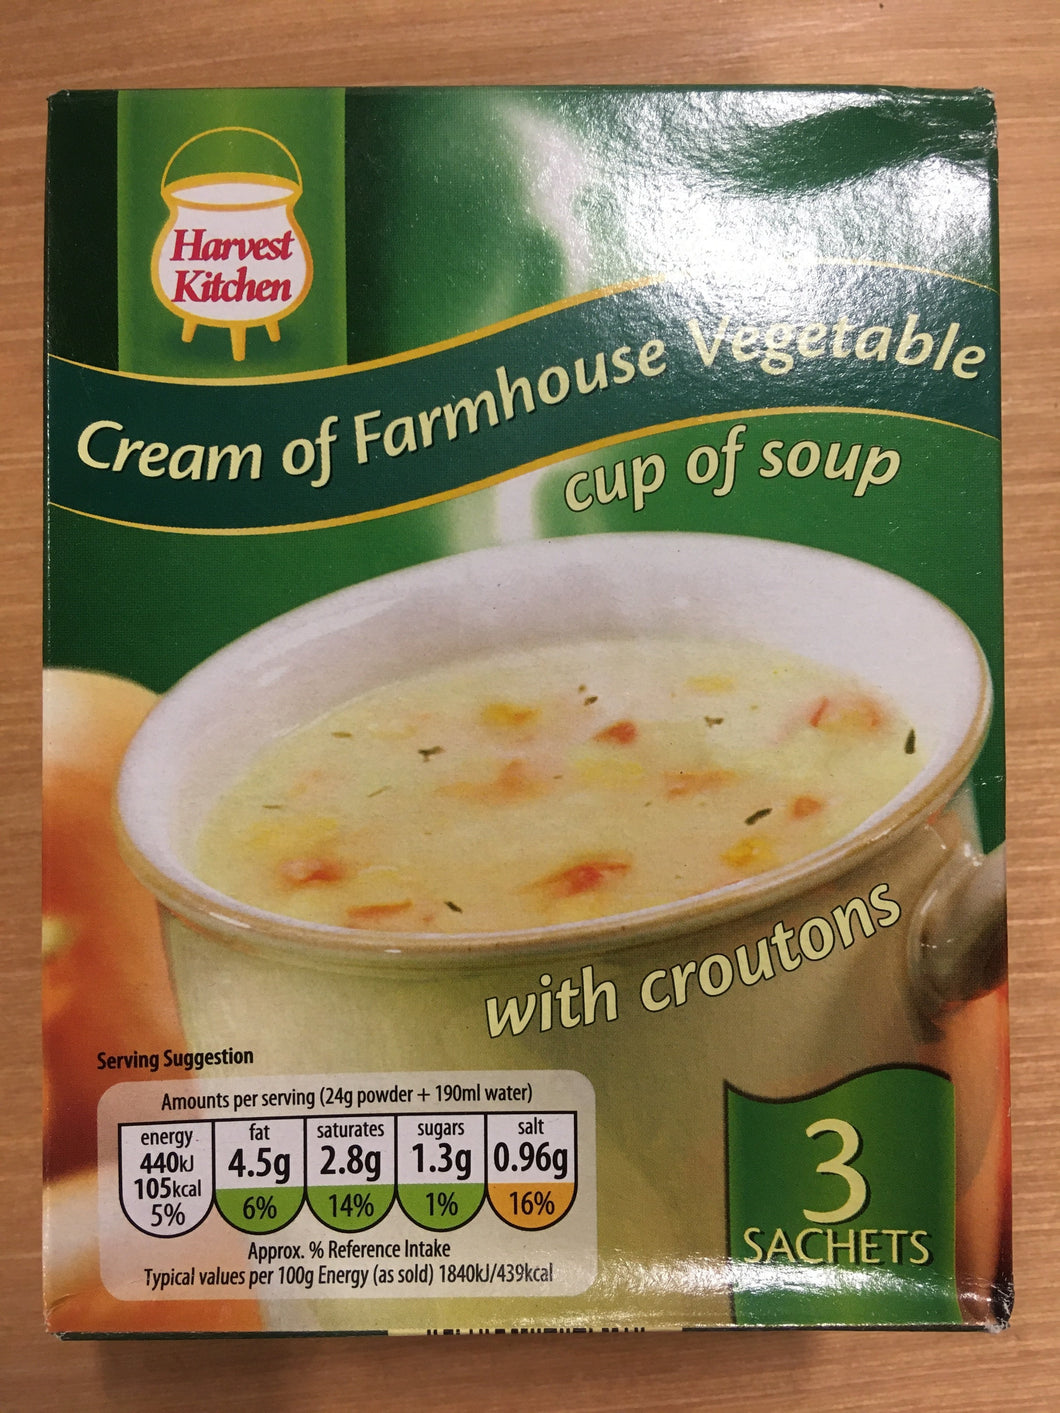 Harvest Kitchen Cream of Farmhouse Vegetable Soup in a Cup 3x Sachets 72g